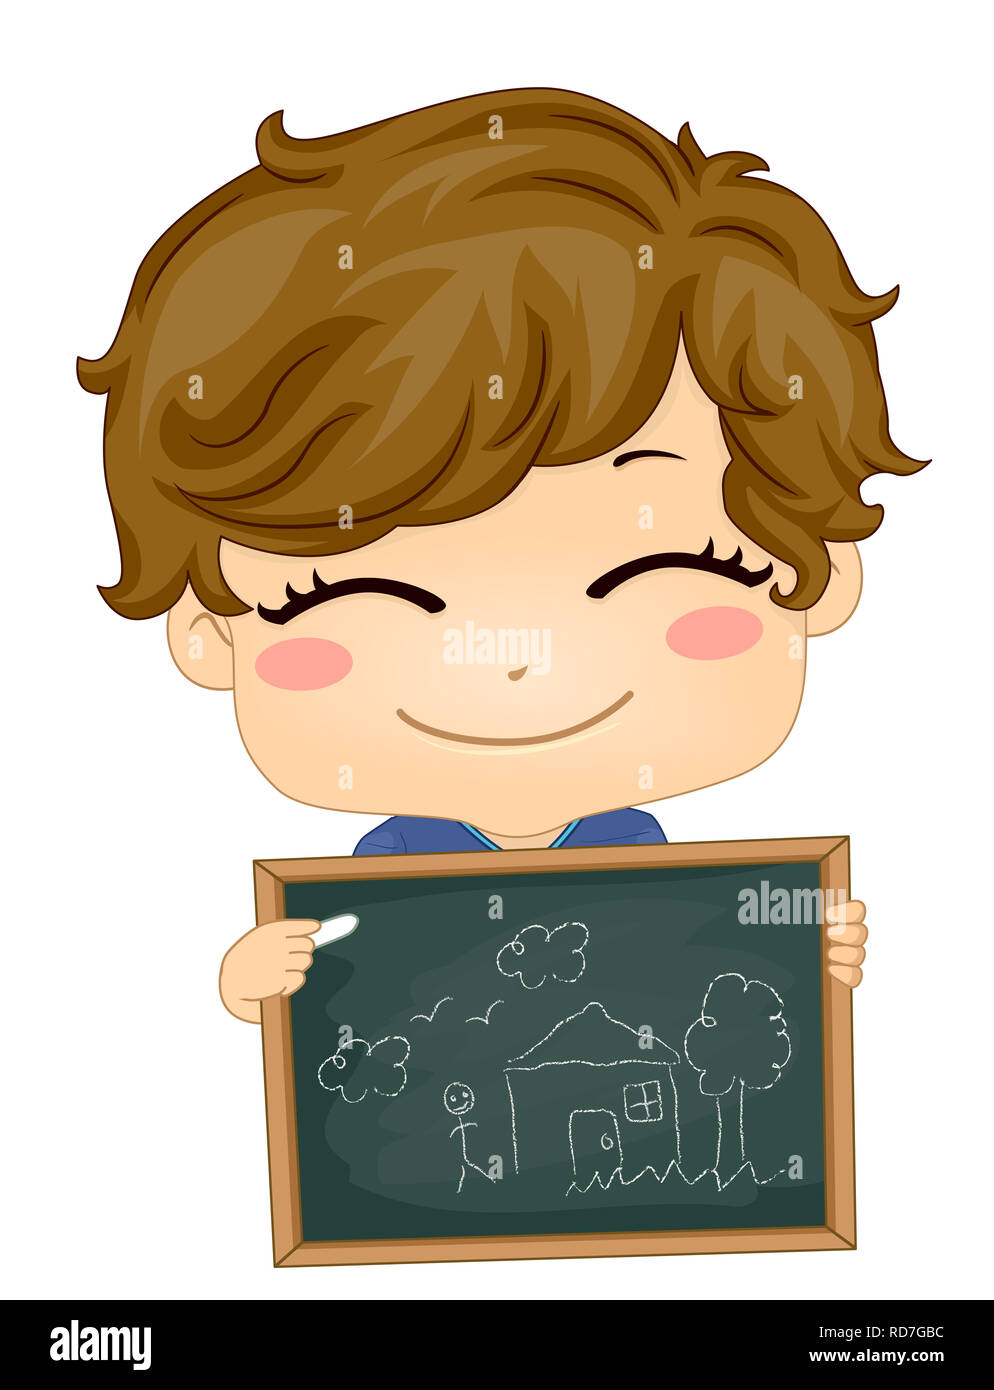 Illustration of a Kid Boy Holding a Chalk Board While Telling Story Stock Photo